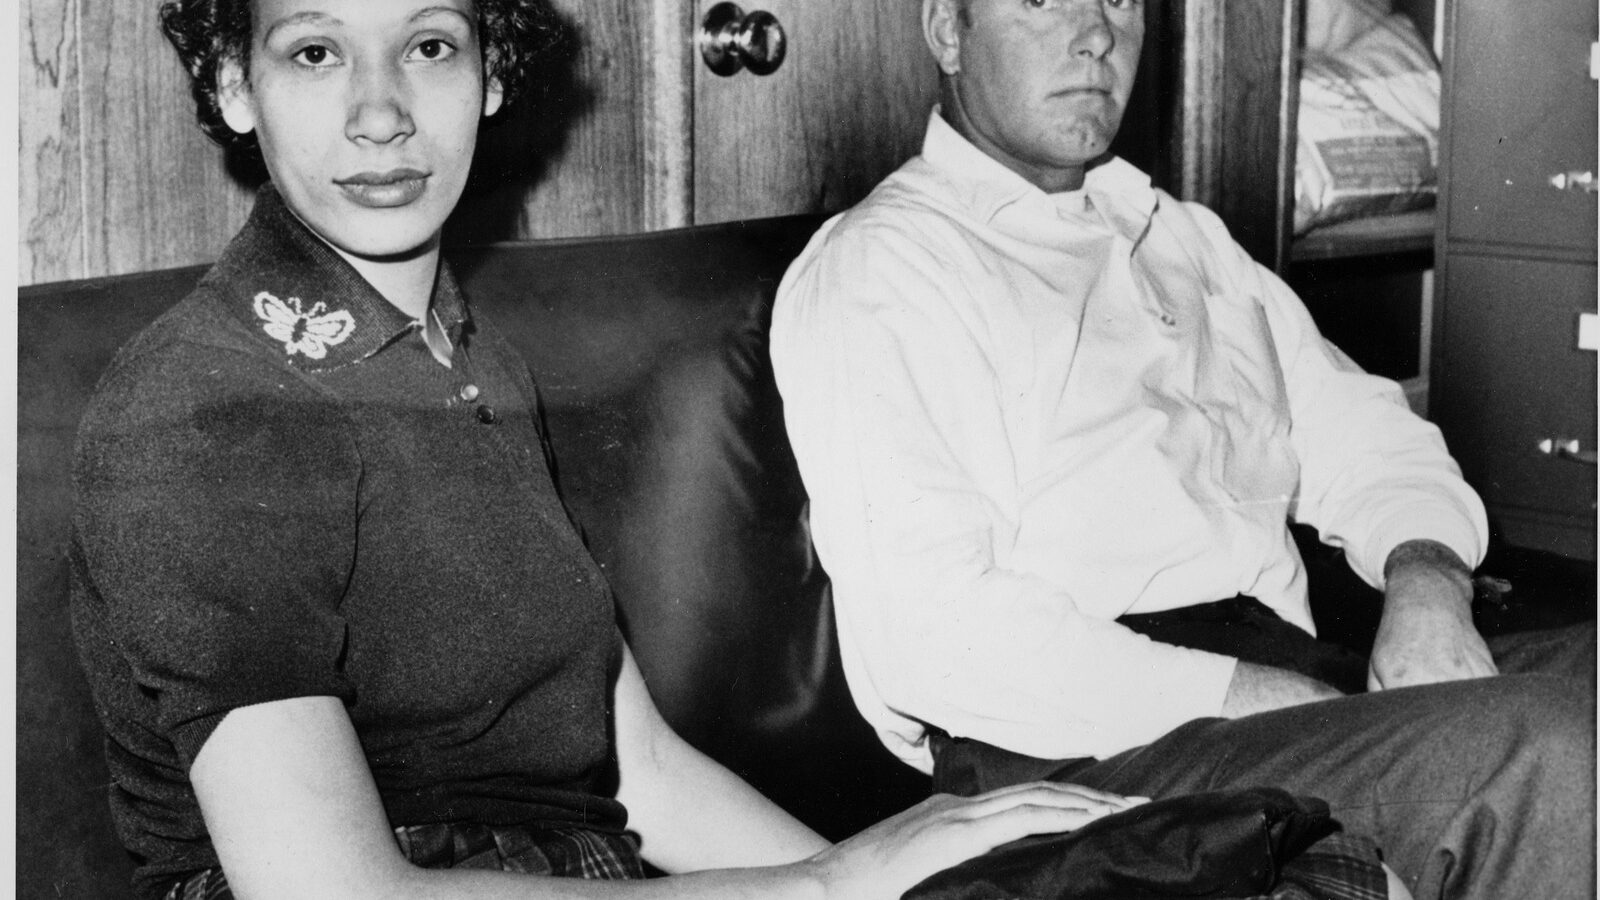 Richard P. Loving and his wife, Mildred, pose in this Jan. 26, 1965, file photograph. Residents of Caroline County, Virginia,, the couple was convicted under the state's law that banned mixed marriages. (AP Photo)